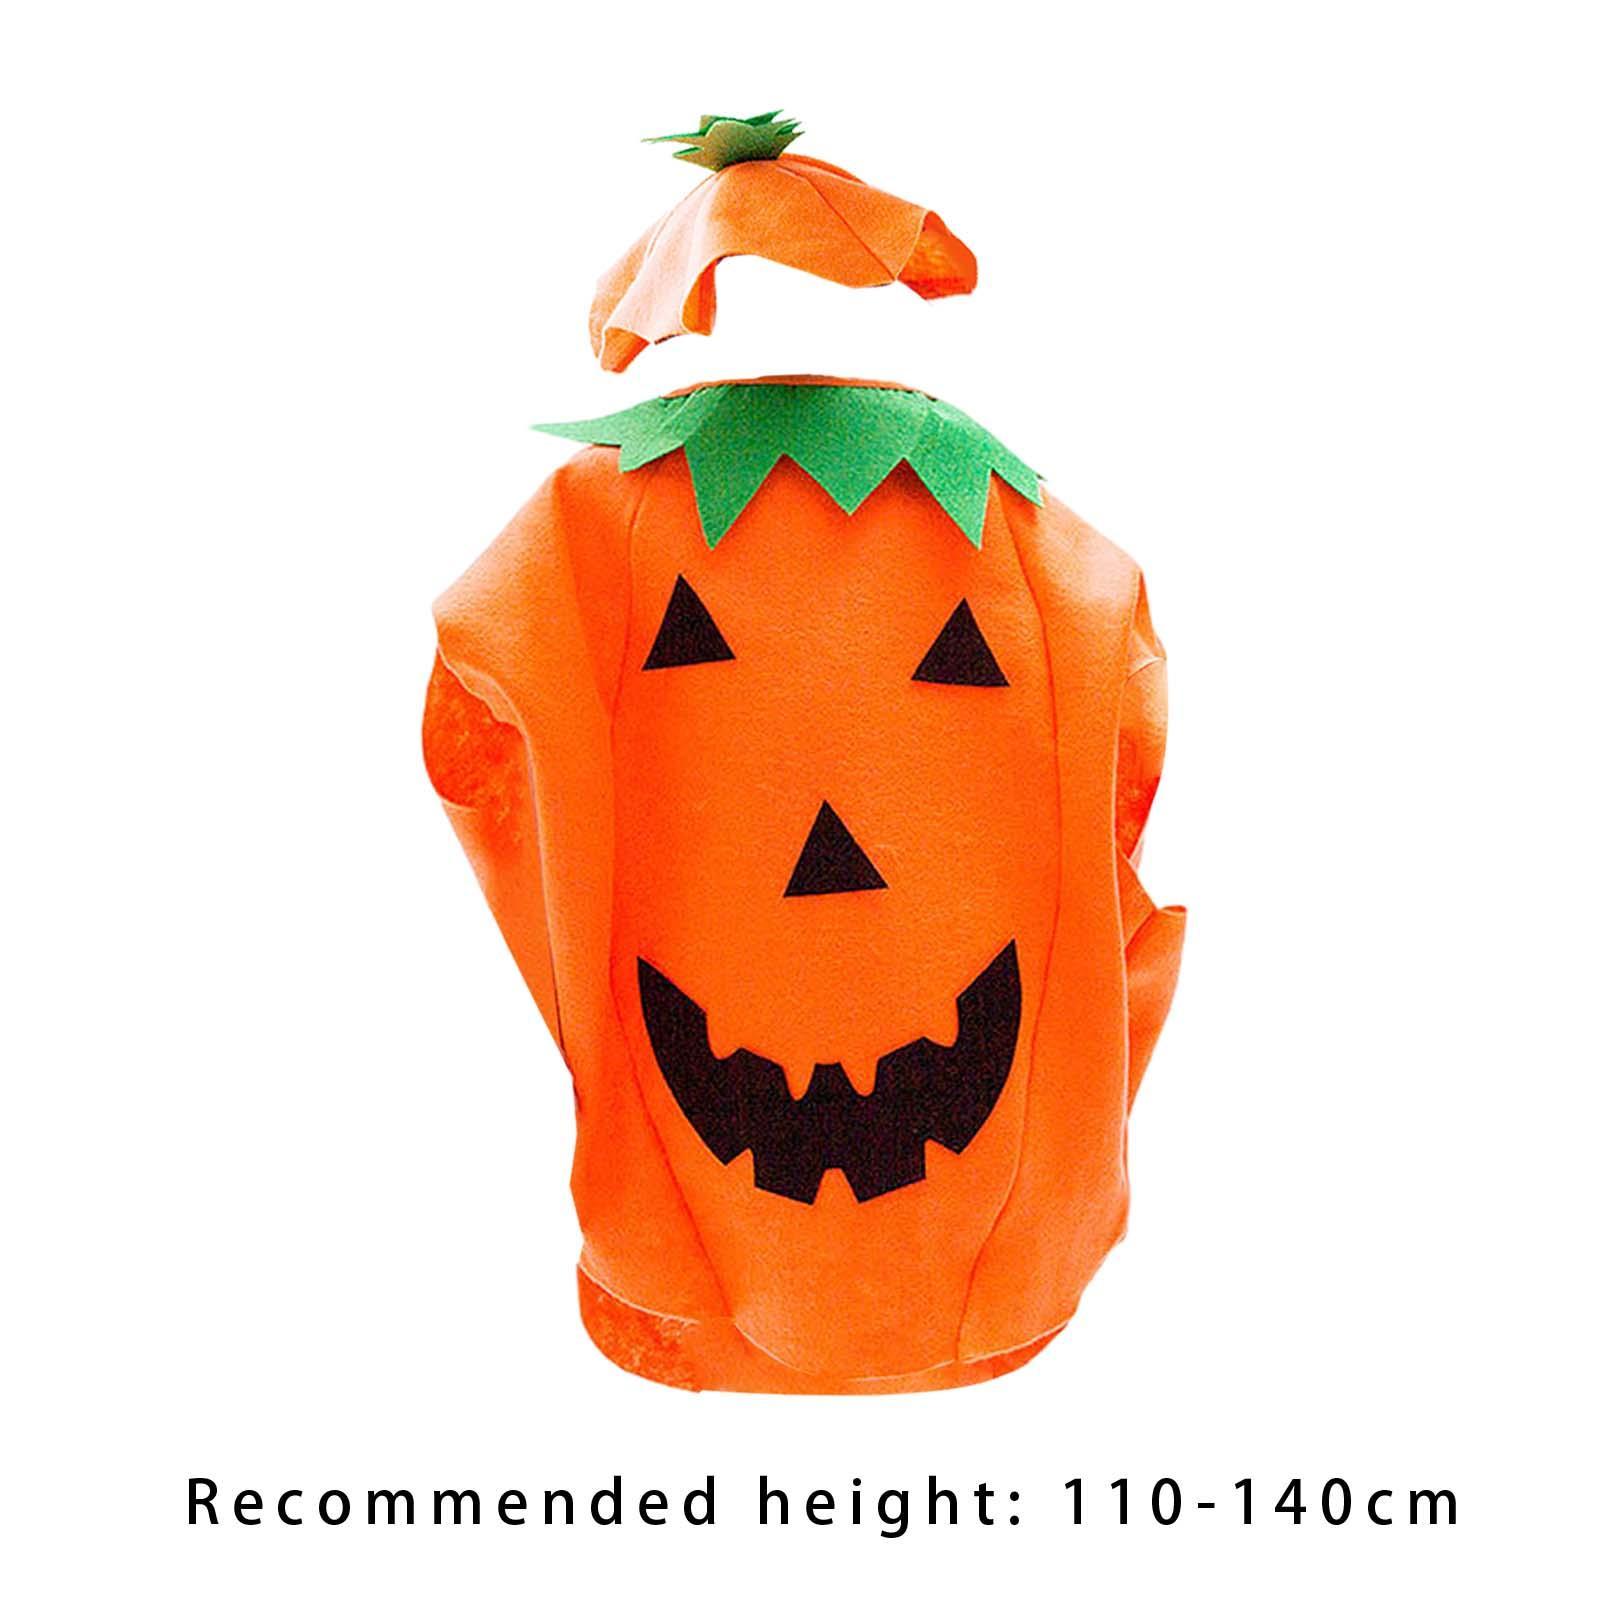 Kids Fruit Costume Cosplay Cute Children Costume for Themed Party Masquerade